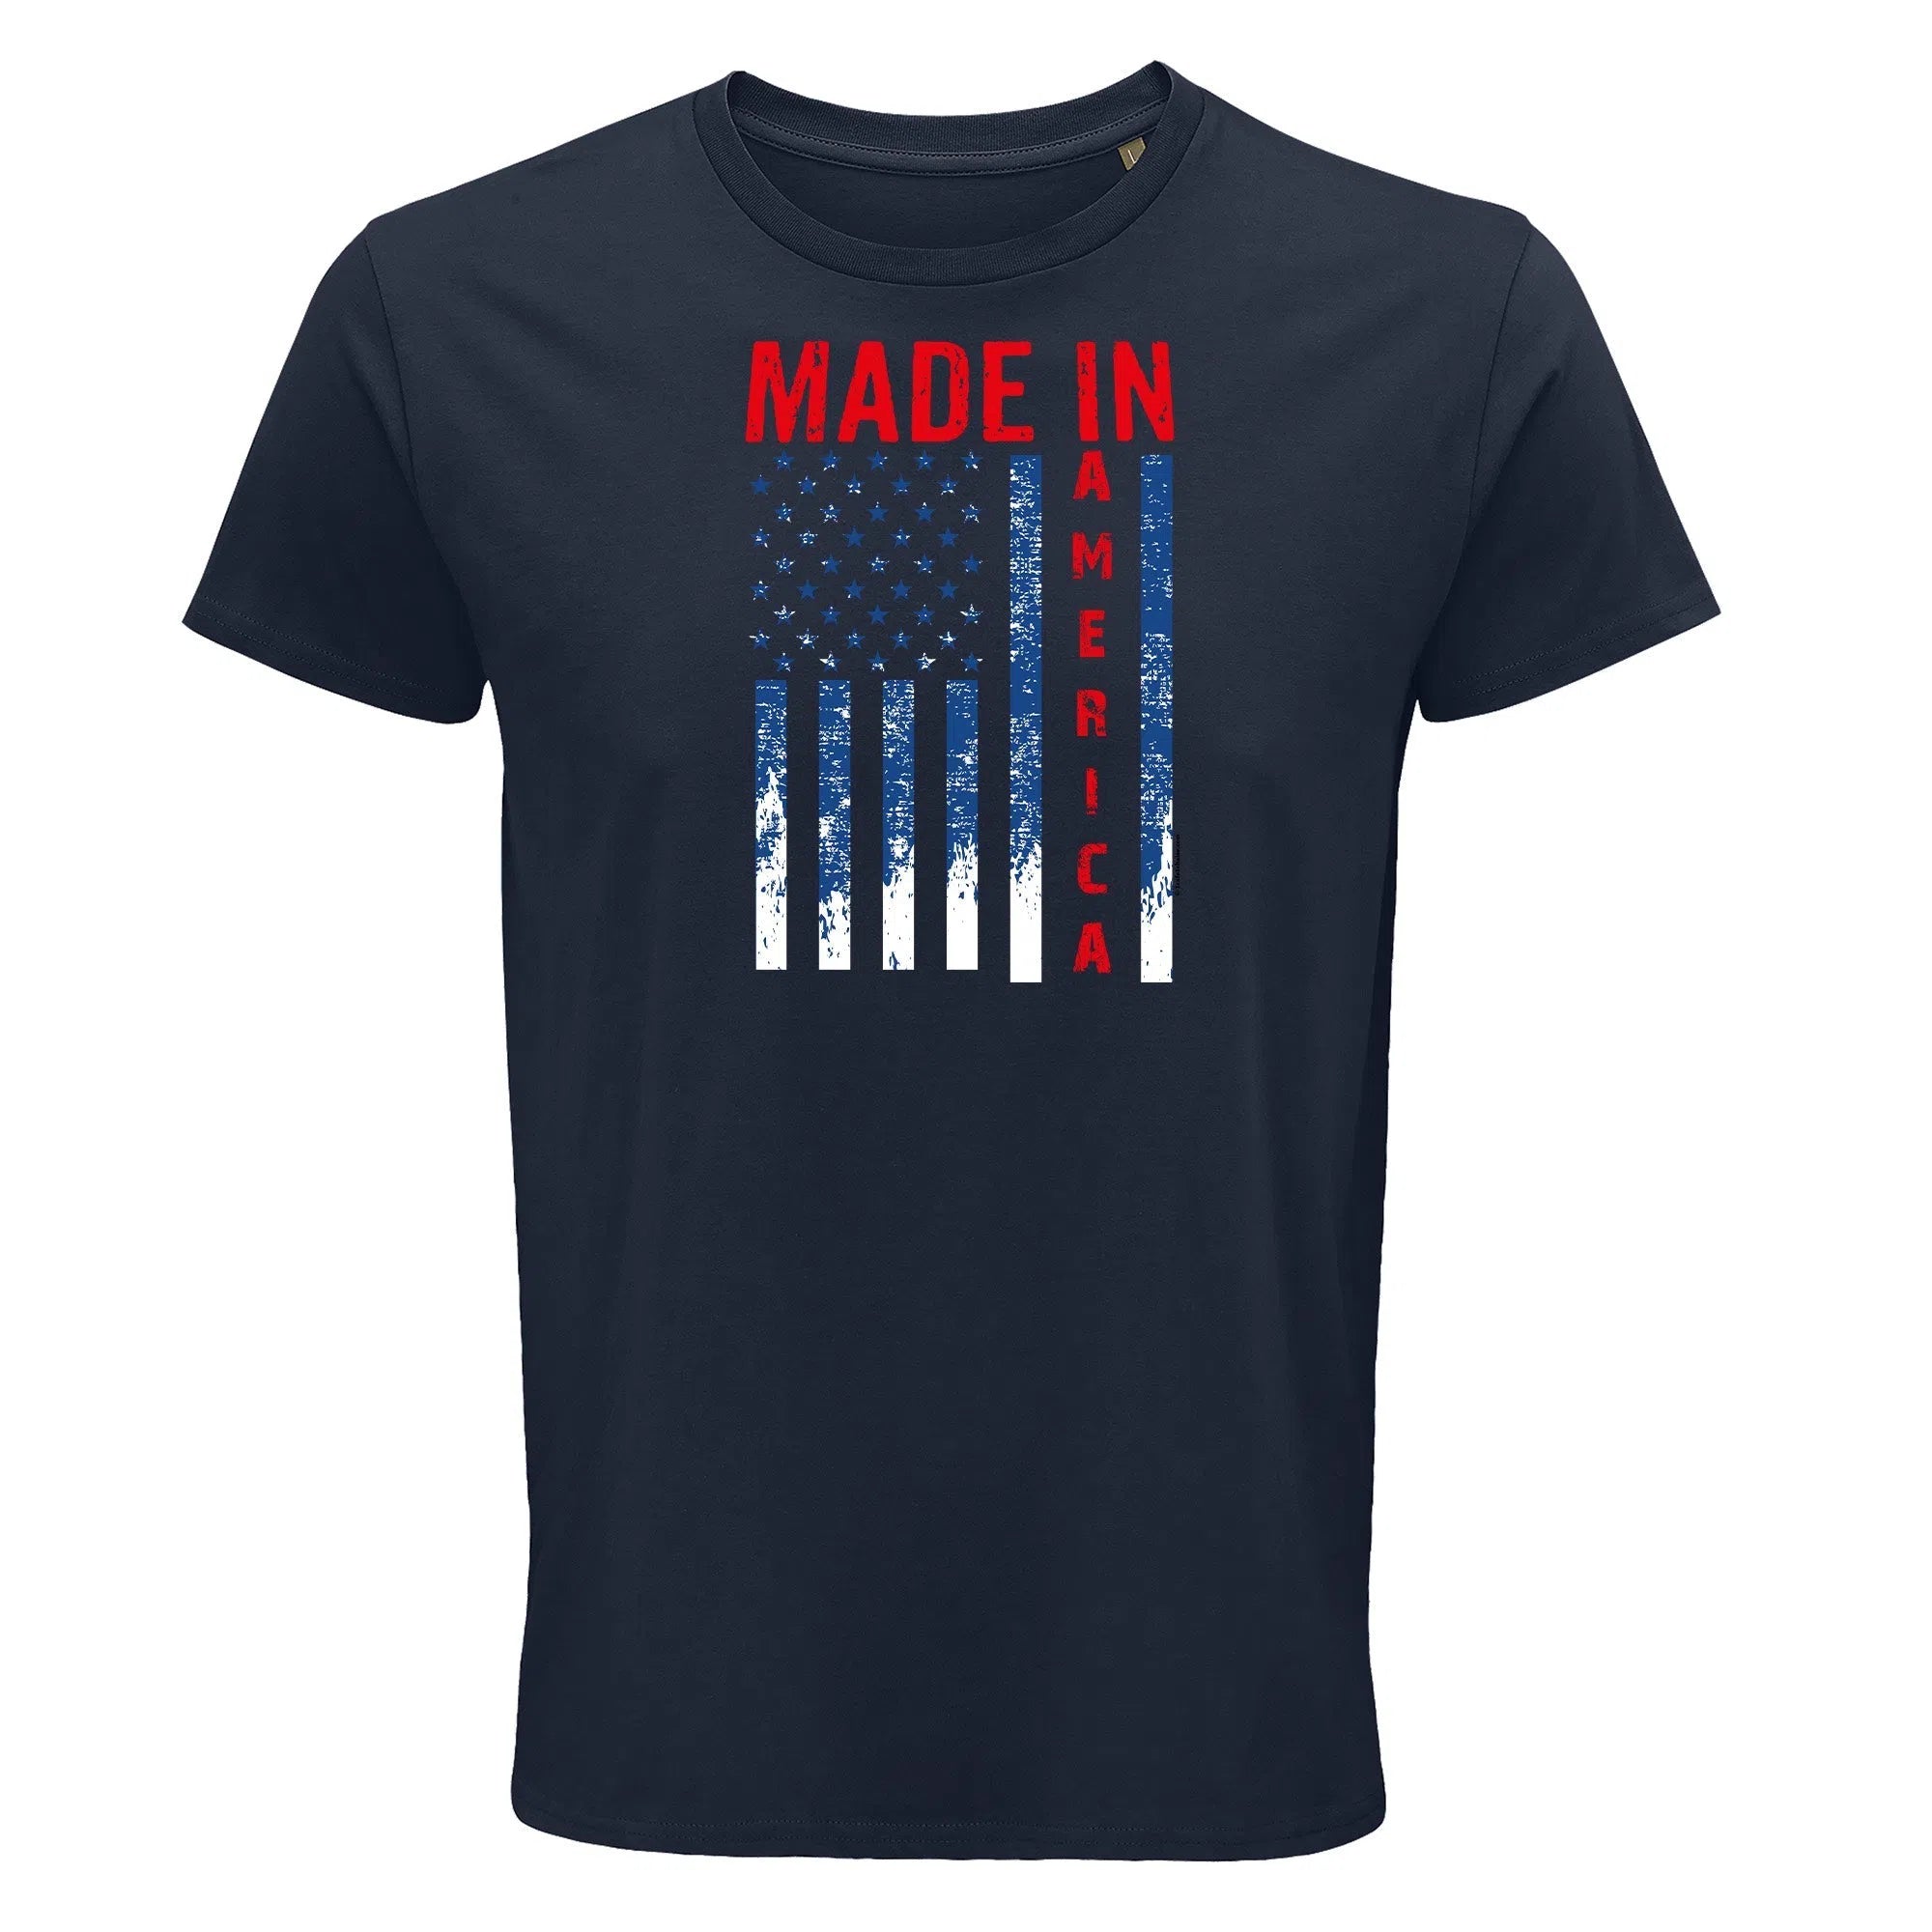 Made in America-Imagesdartistes